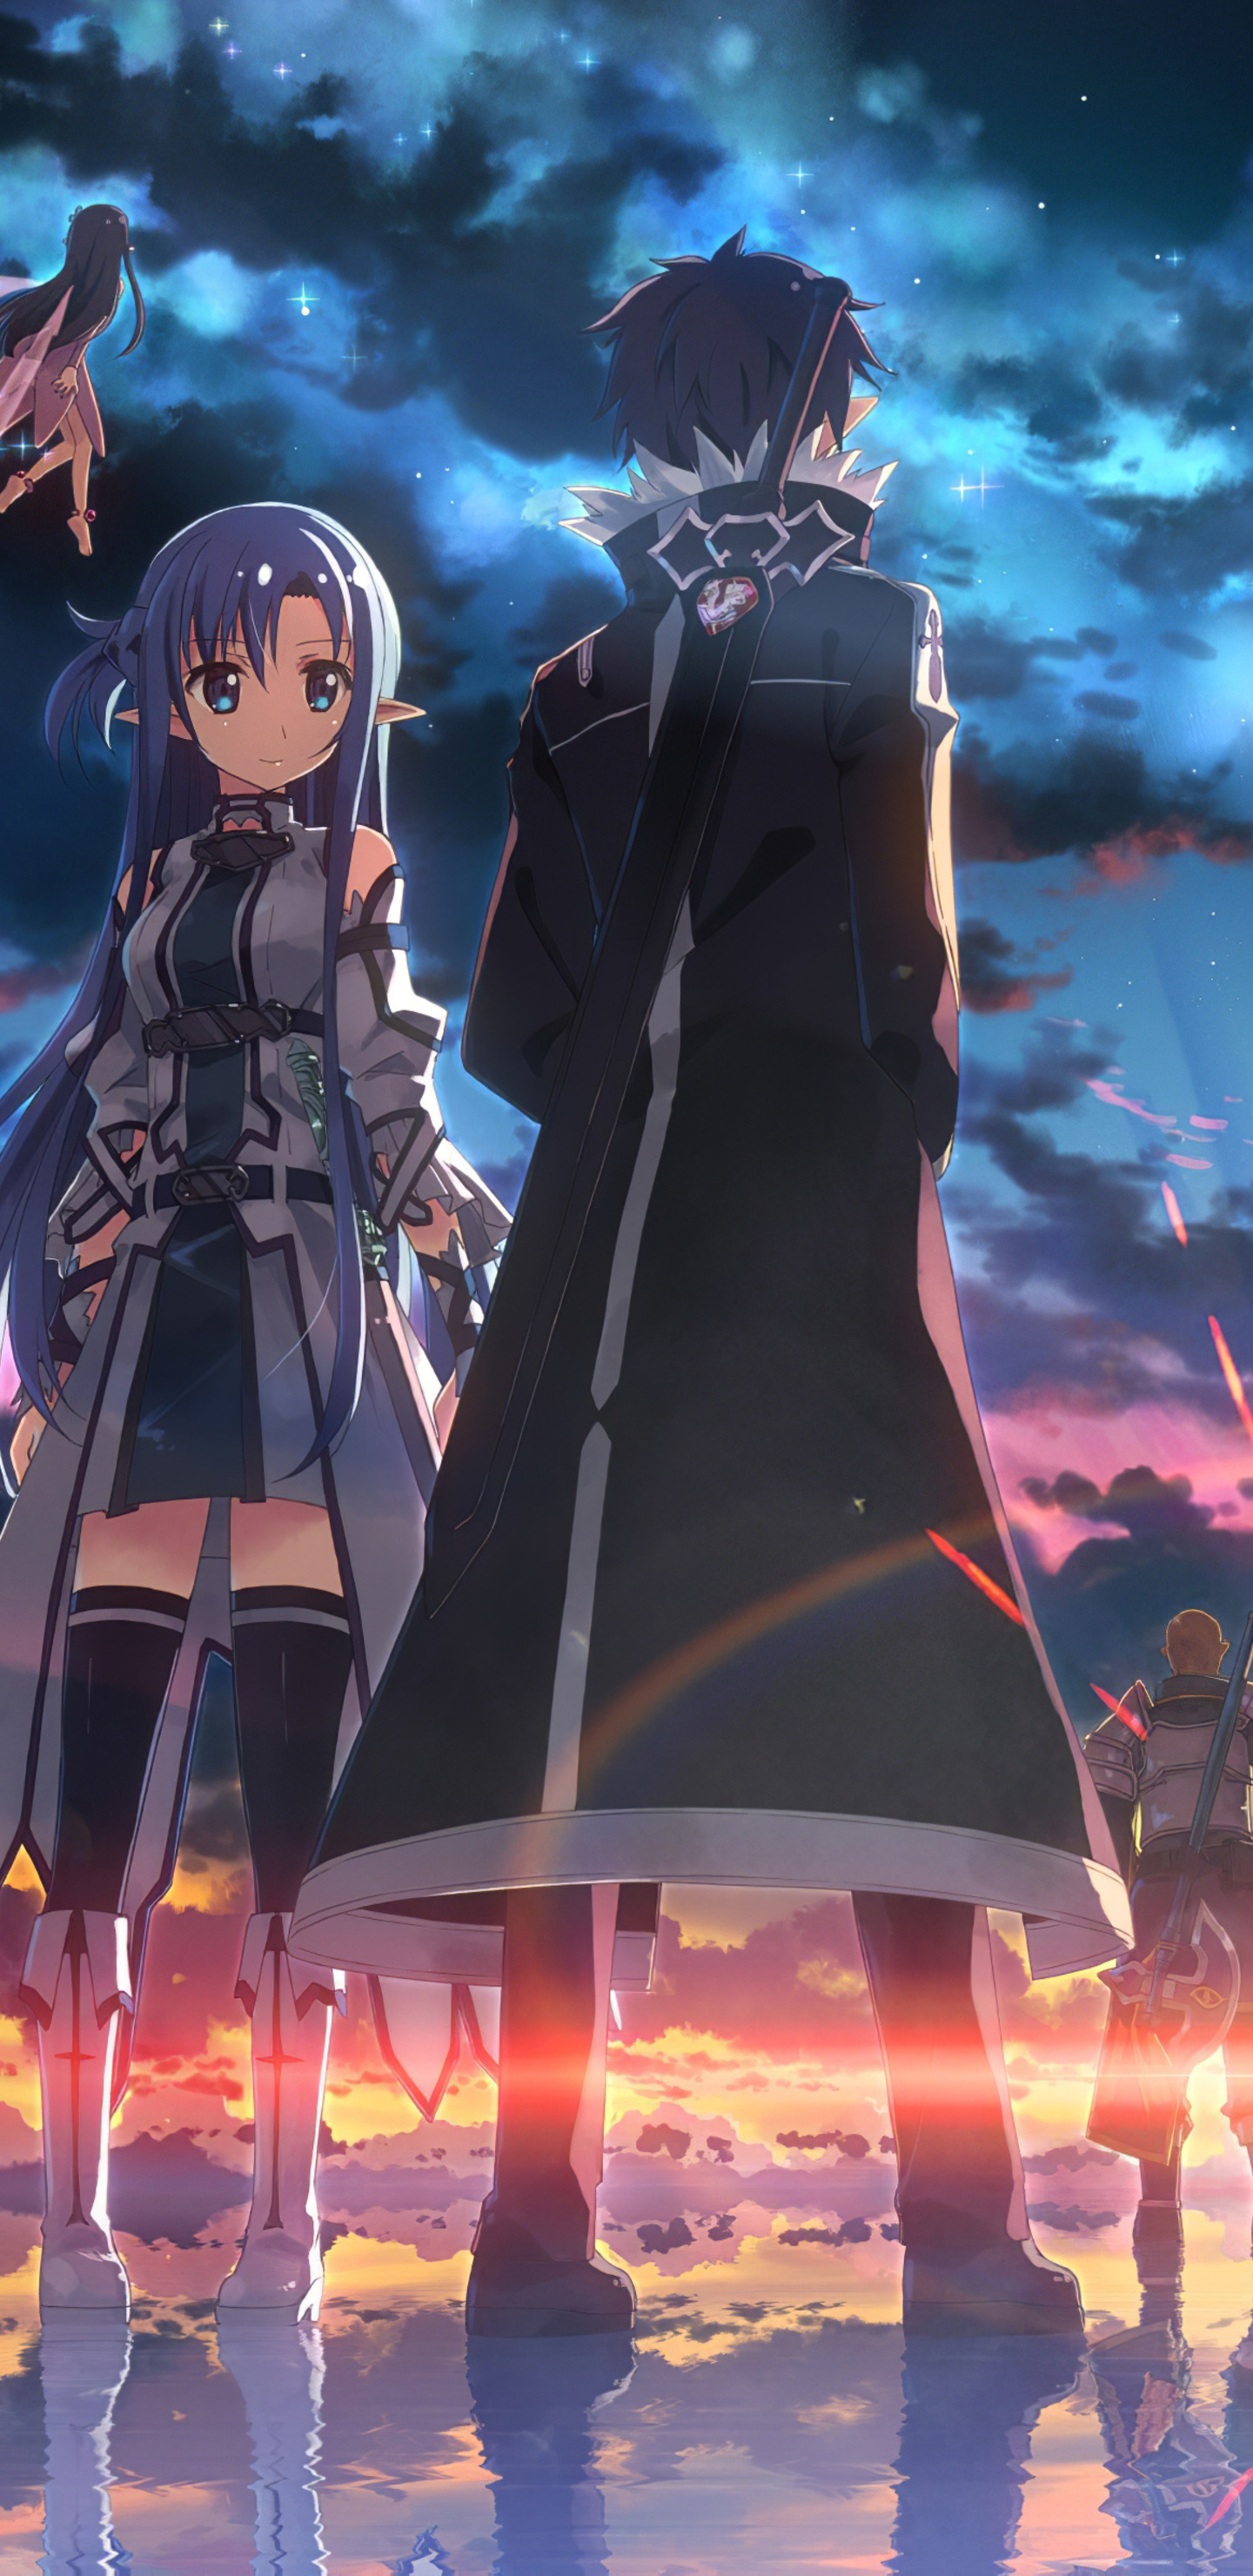 1440x2960 Sword Art Online Anime 4k Samsung Galaxy Note 9,8, S9,S8,S8+ QHD  HD 4k Wallpapers, Images, Backgrounds, Photos and Pictures